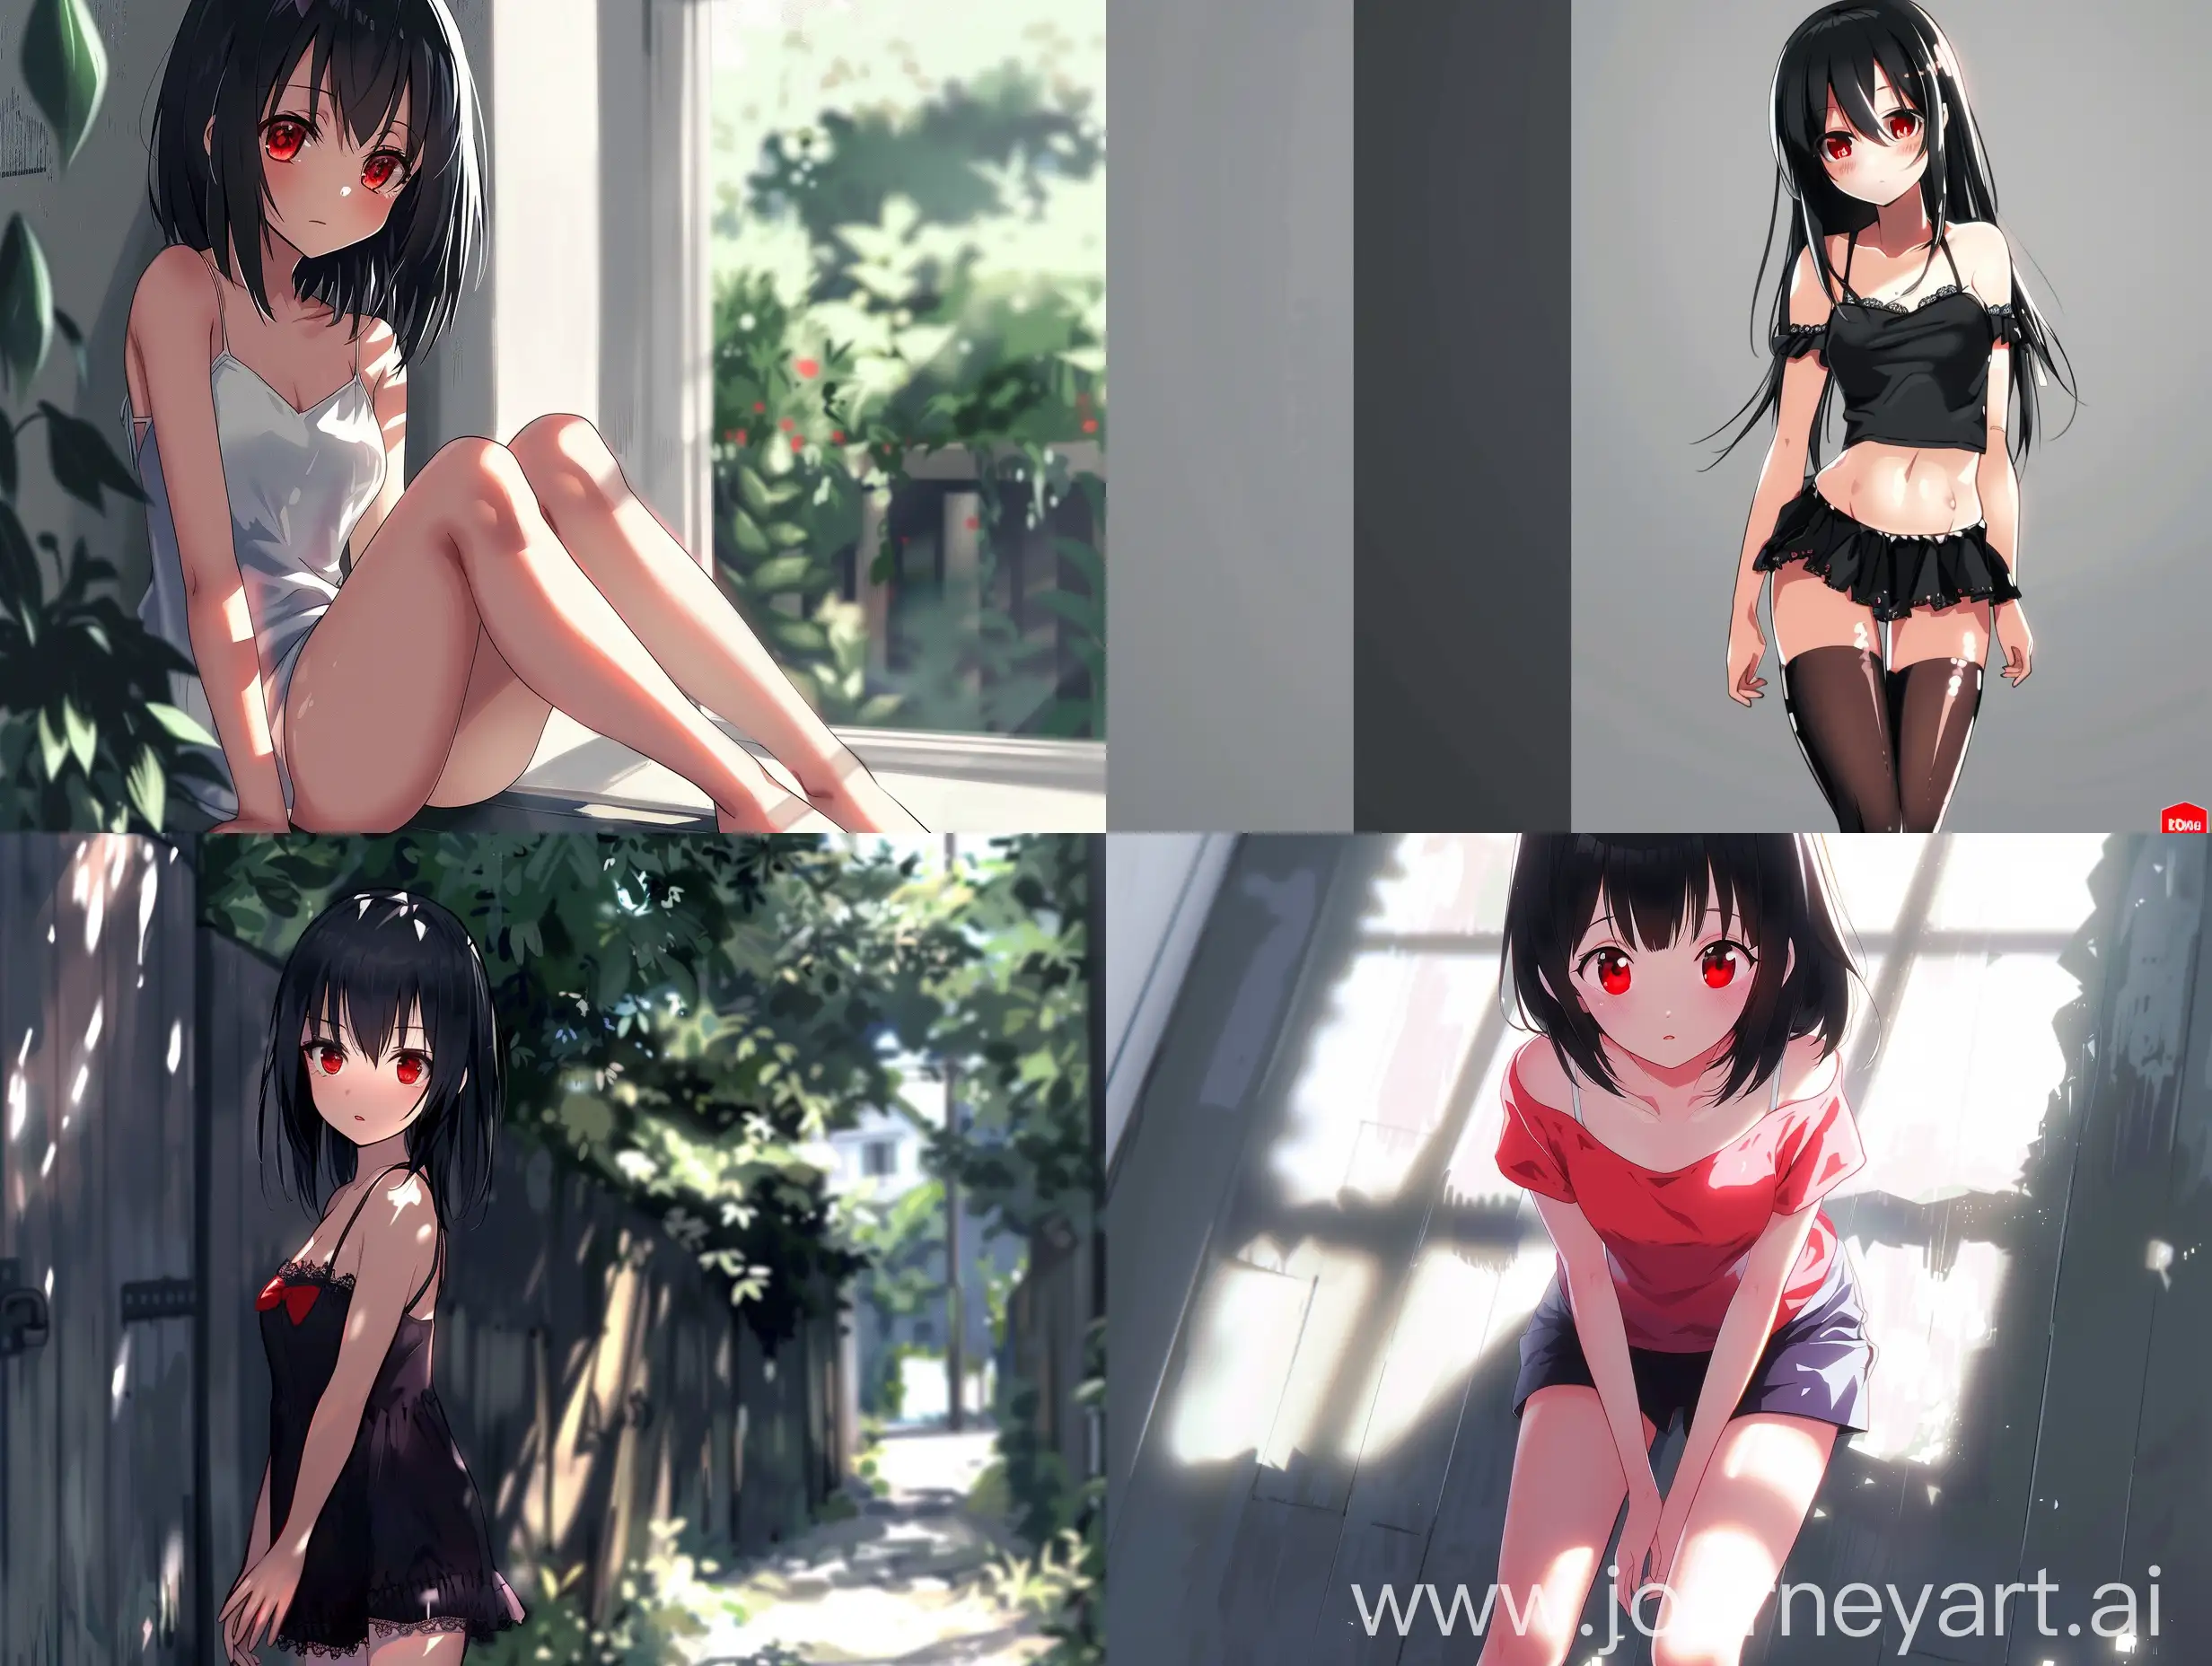 Adorable-Anime-Girl-with-Red-Eyes-and-Black-Hair-Youthful-Beauty-in-a-Playful-Setting